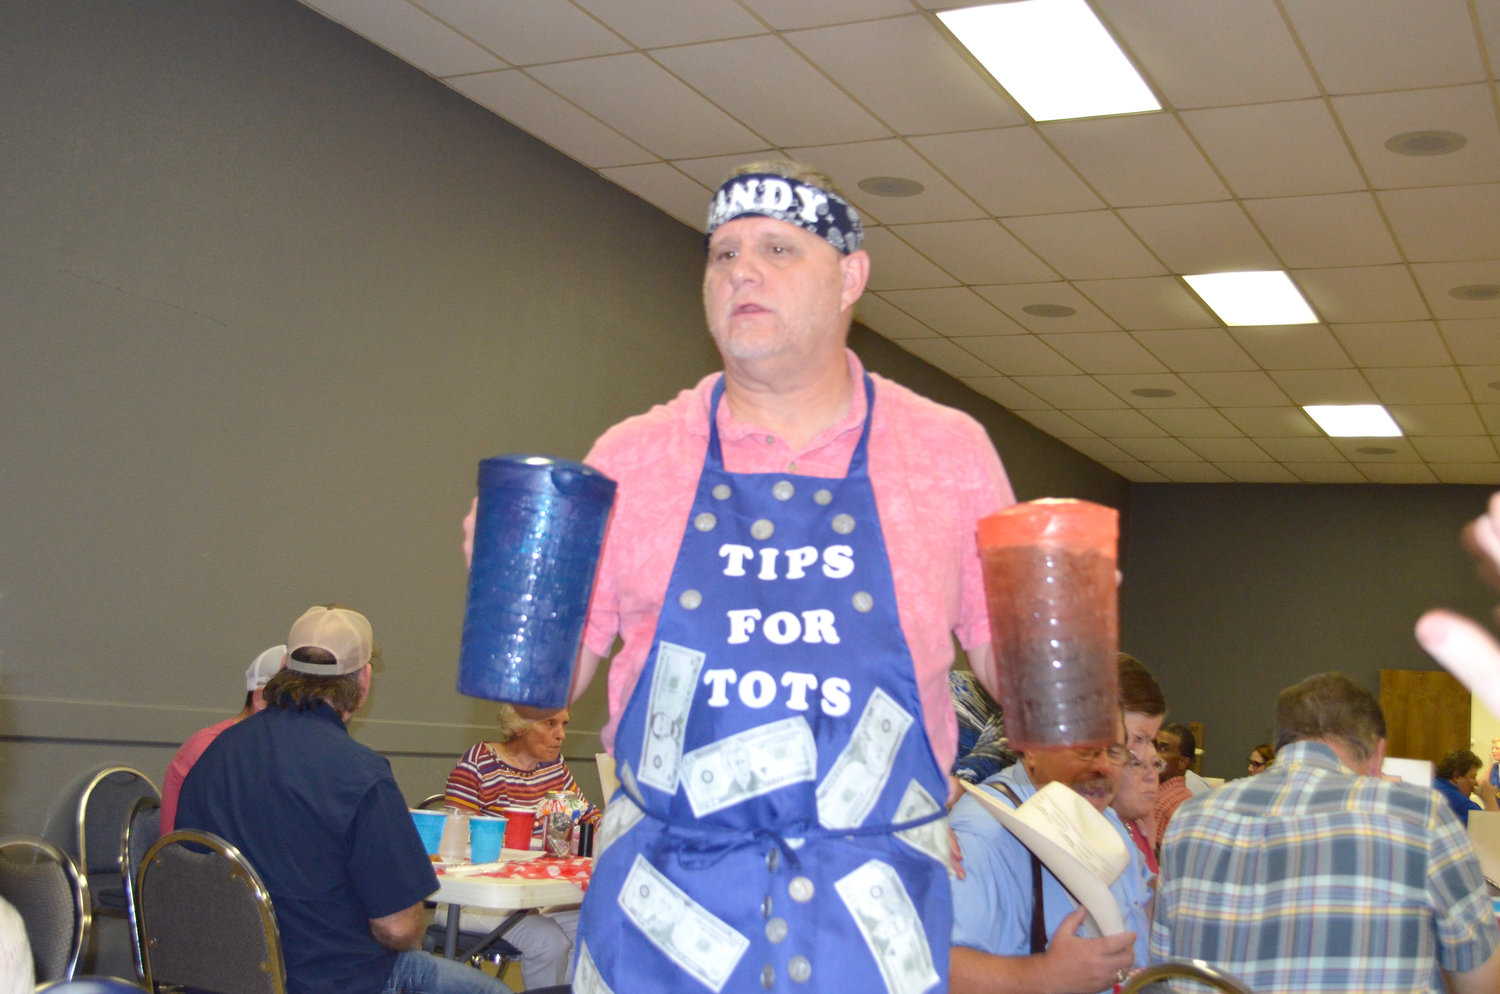 Randy Osborne with New Hope Baptist Church serves tea and water to diners.